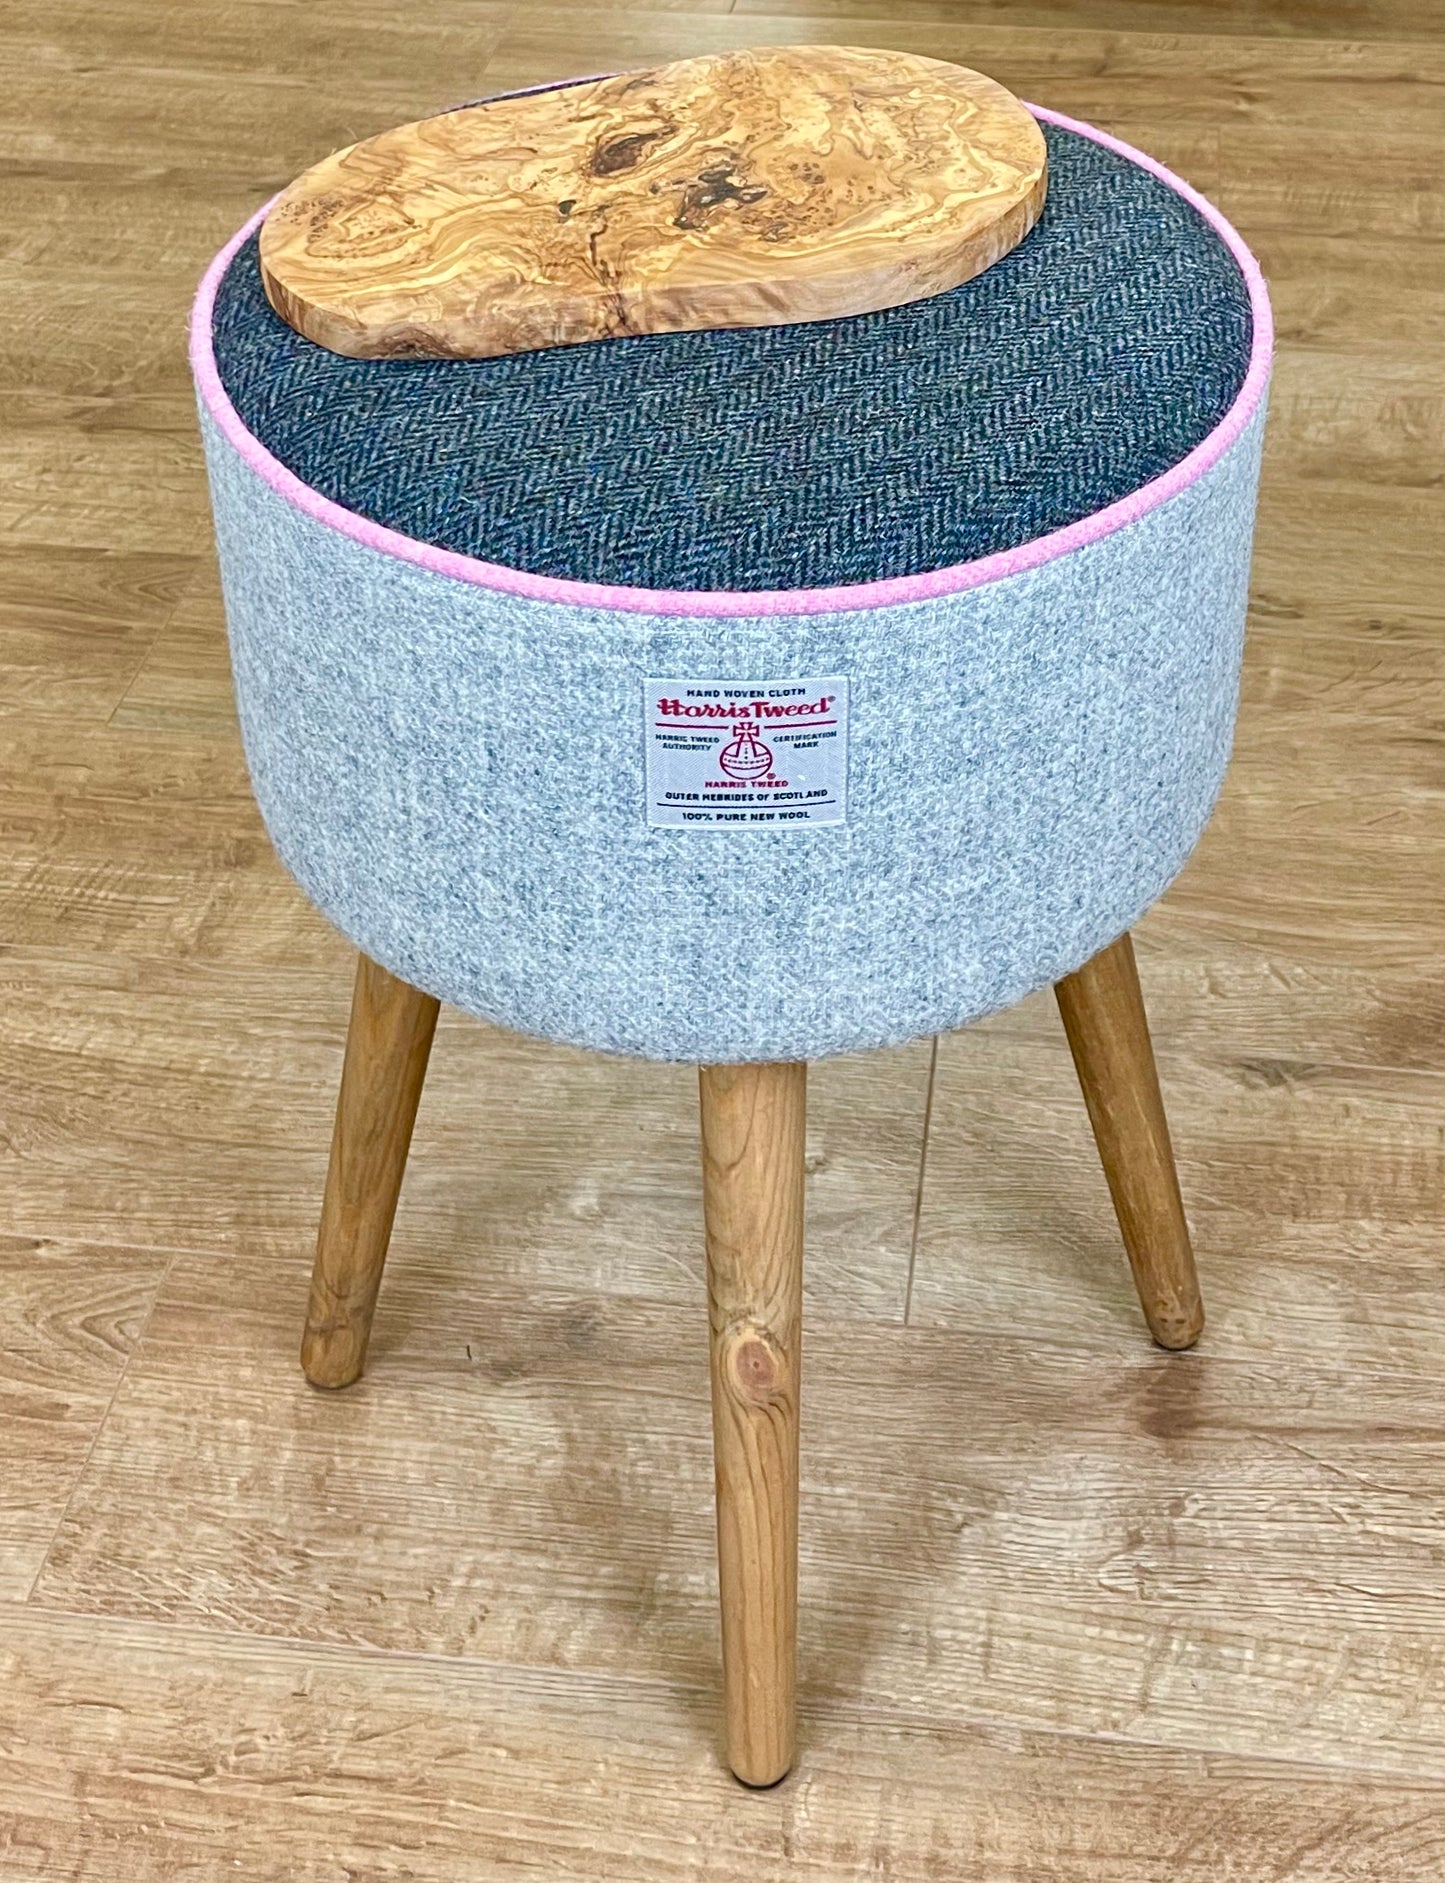 Rustic Style End Table, Grey and Charcoal Harris Tweed with Pink Piping and and Olive Wood Top